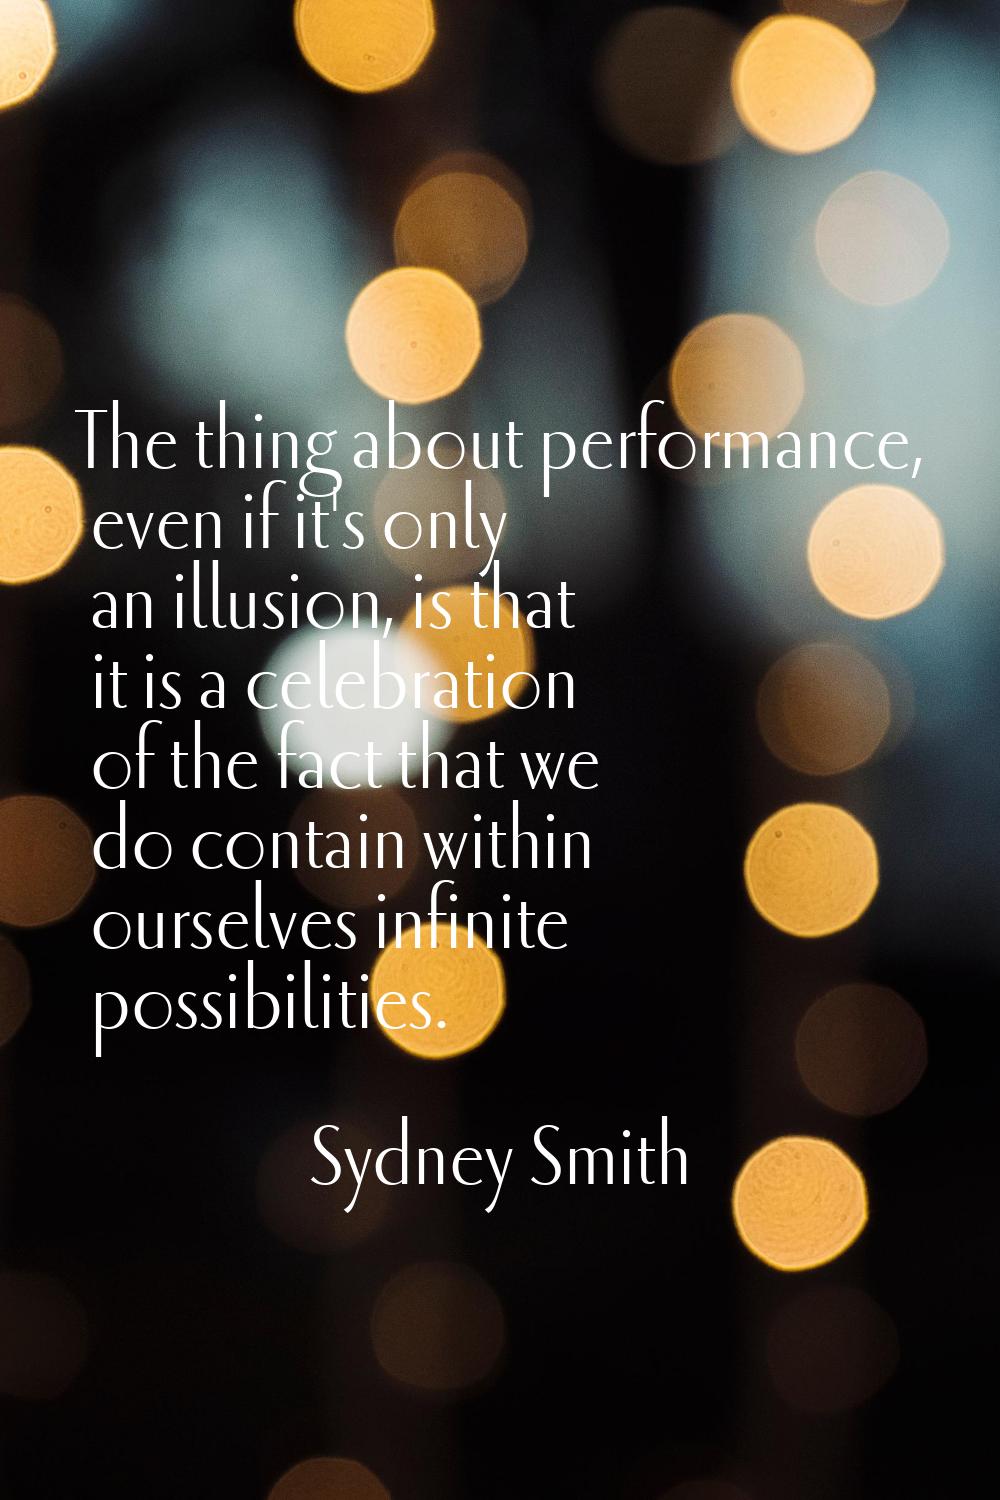 The thing about performance, even if it's only an illusion, is that it is a celebration of the fact